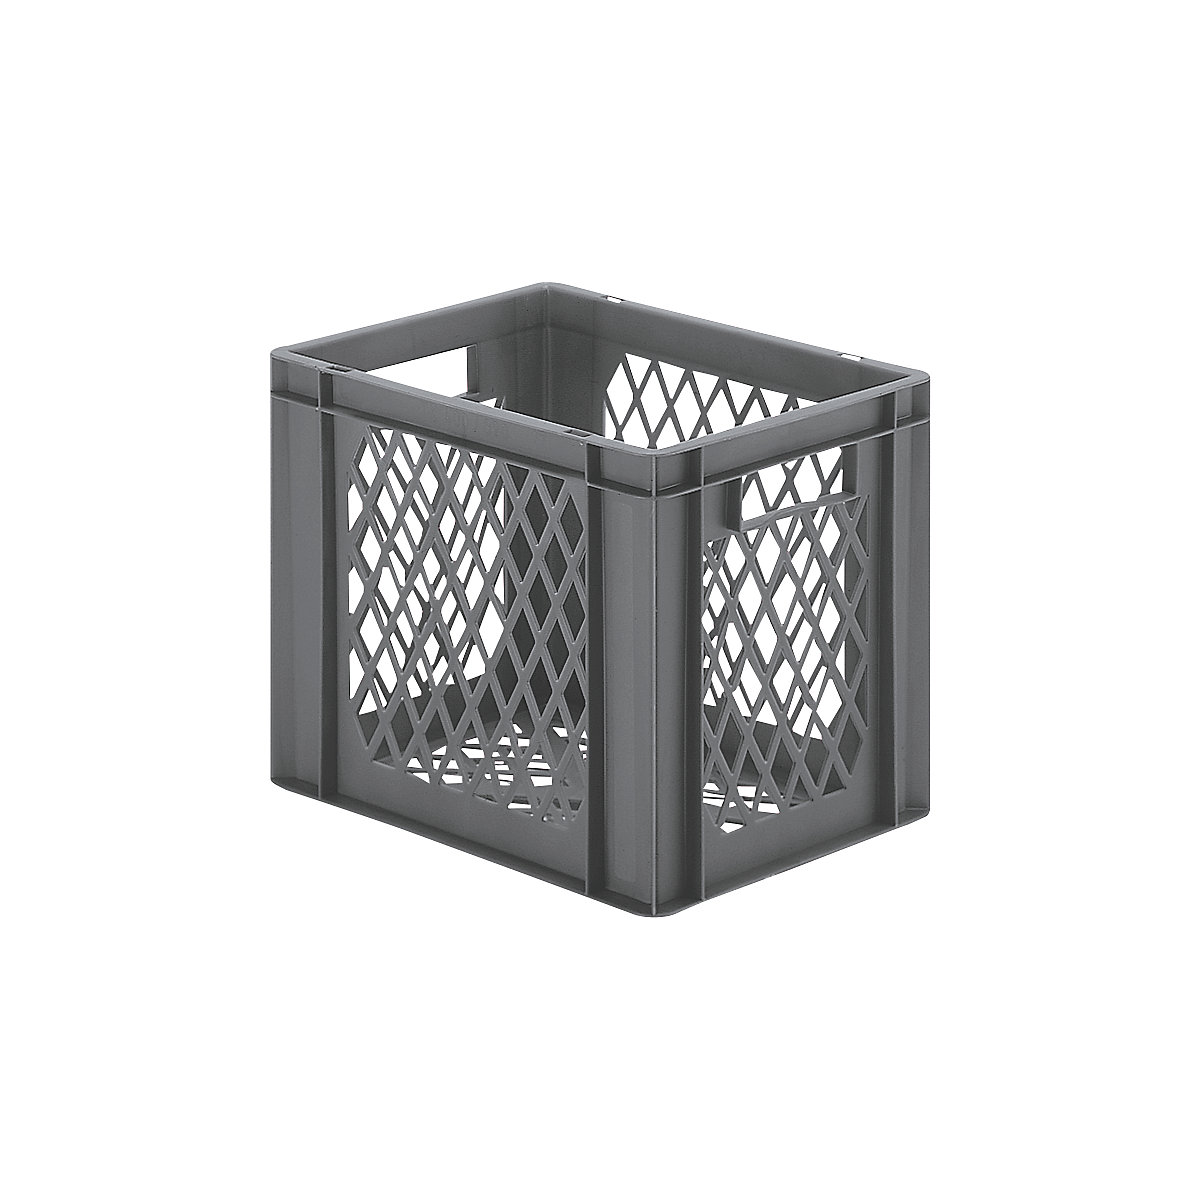 Euro stacking container, perforated walls and base, LxWxH 400 x 300 x 320 mm, grey, pack of 5